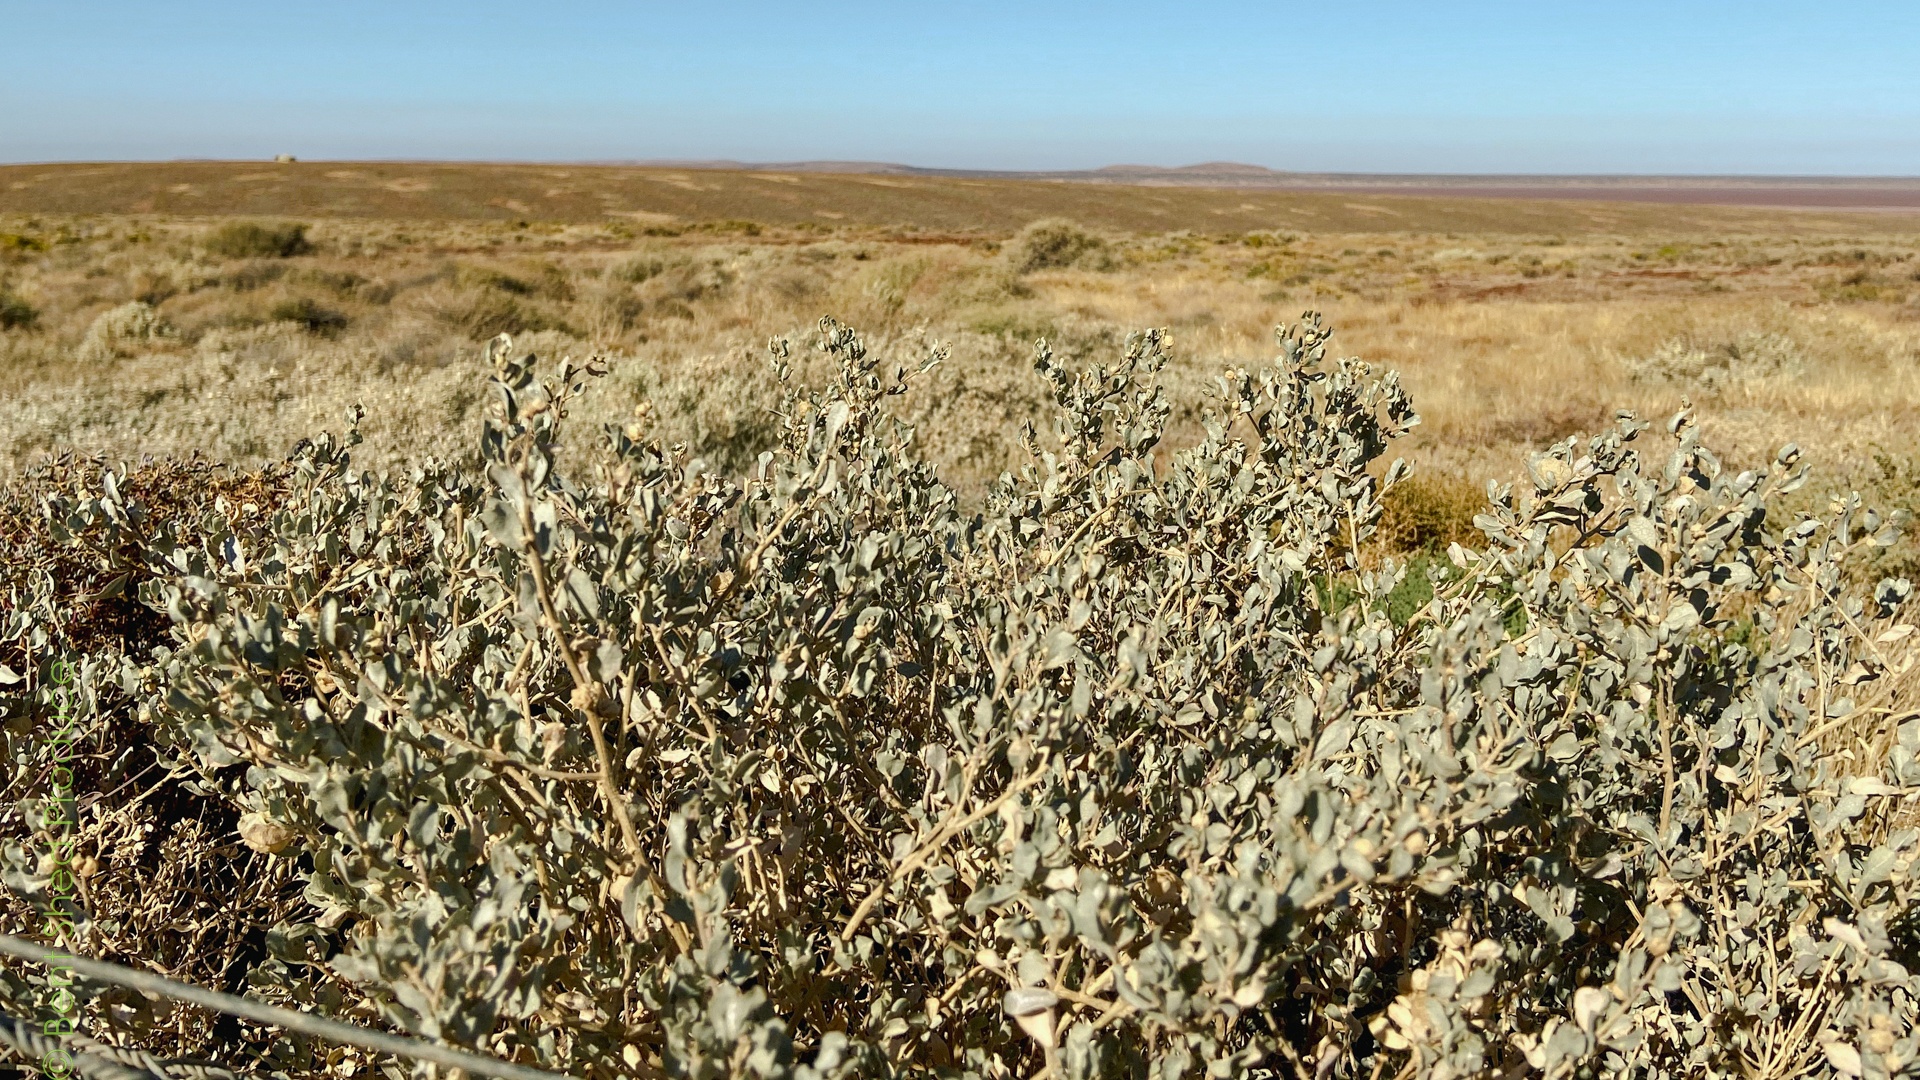 Grey-green leaves at the foreground of the image, fading to a ochre-yellow background and blue sky.